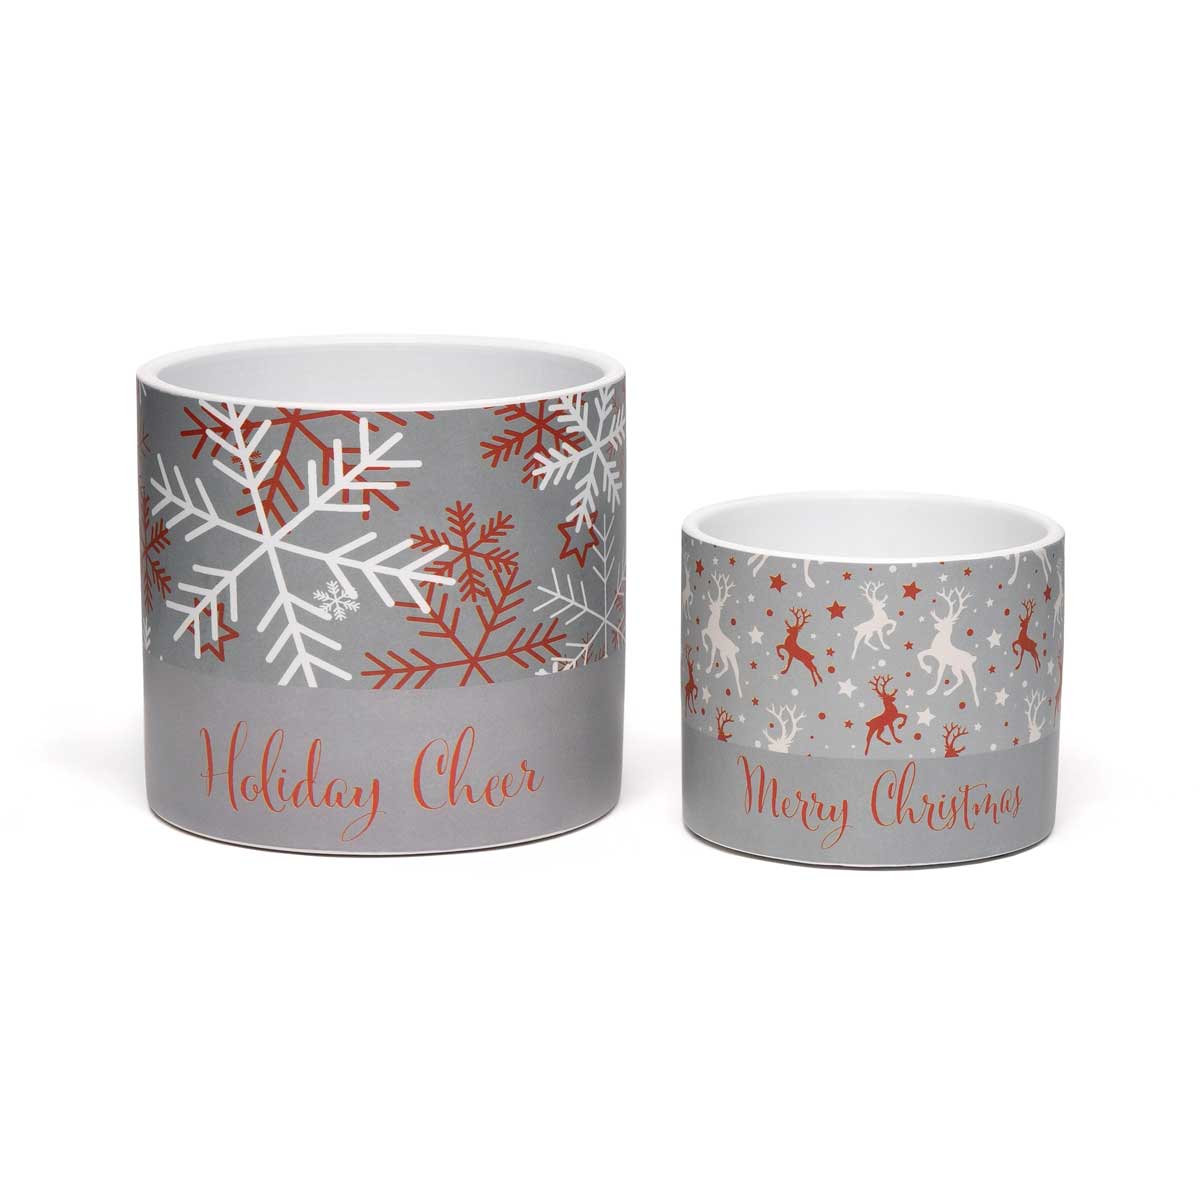 POT HOLIDAY CHEER LARGE 5.25IN X 4.75IN CERAMIC - Click Image to Close